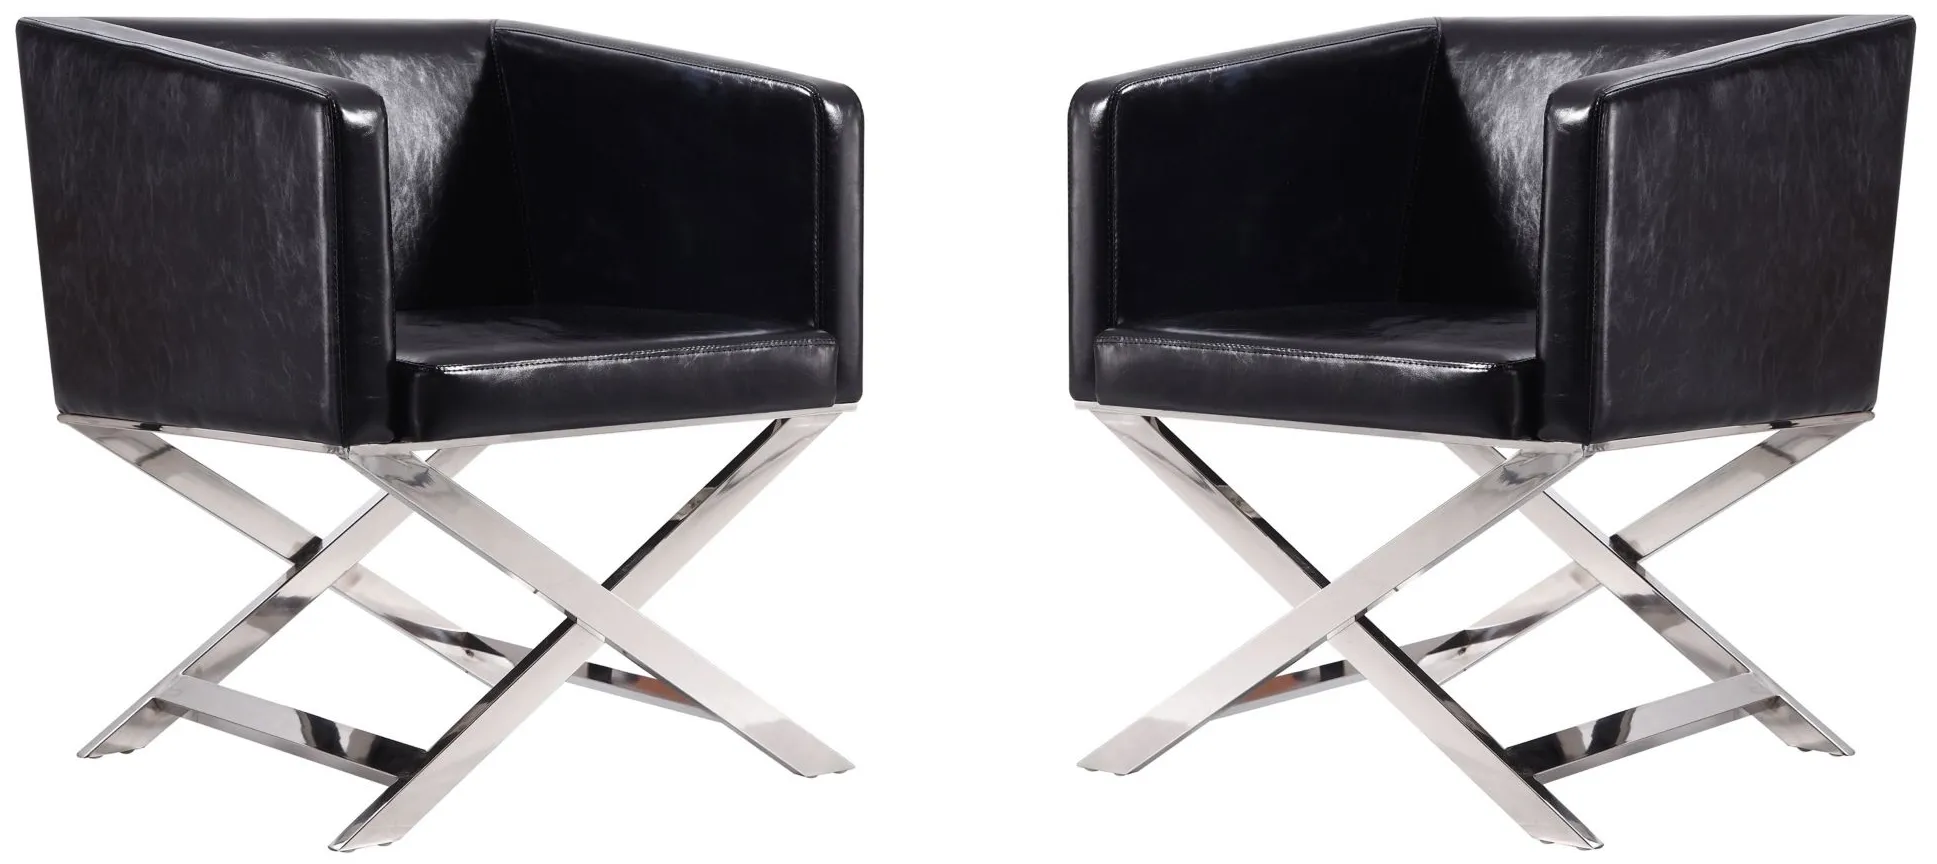 Hollywood Lounge Accent Chair (Set of 2) in Black and Polished Chrome by Manhattan Comfort